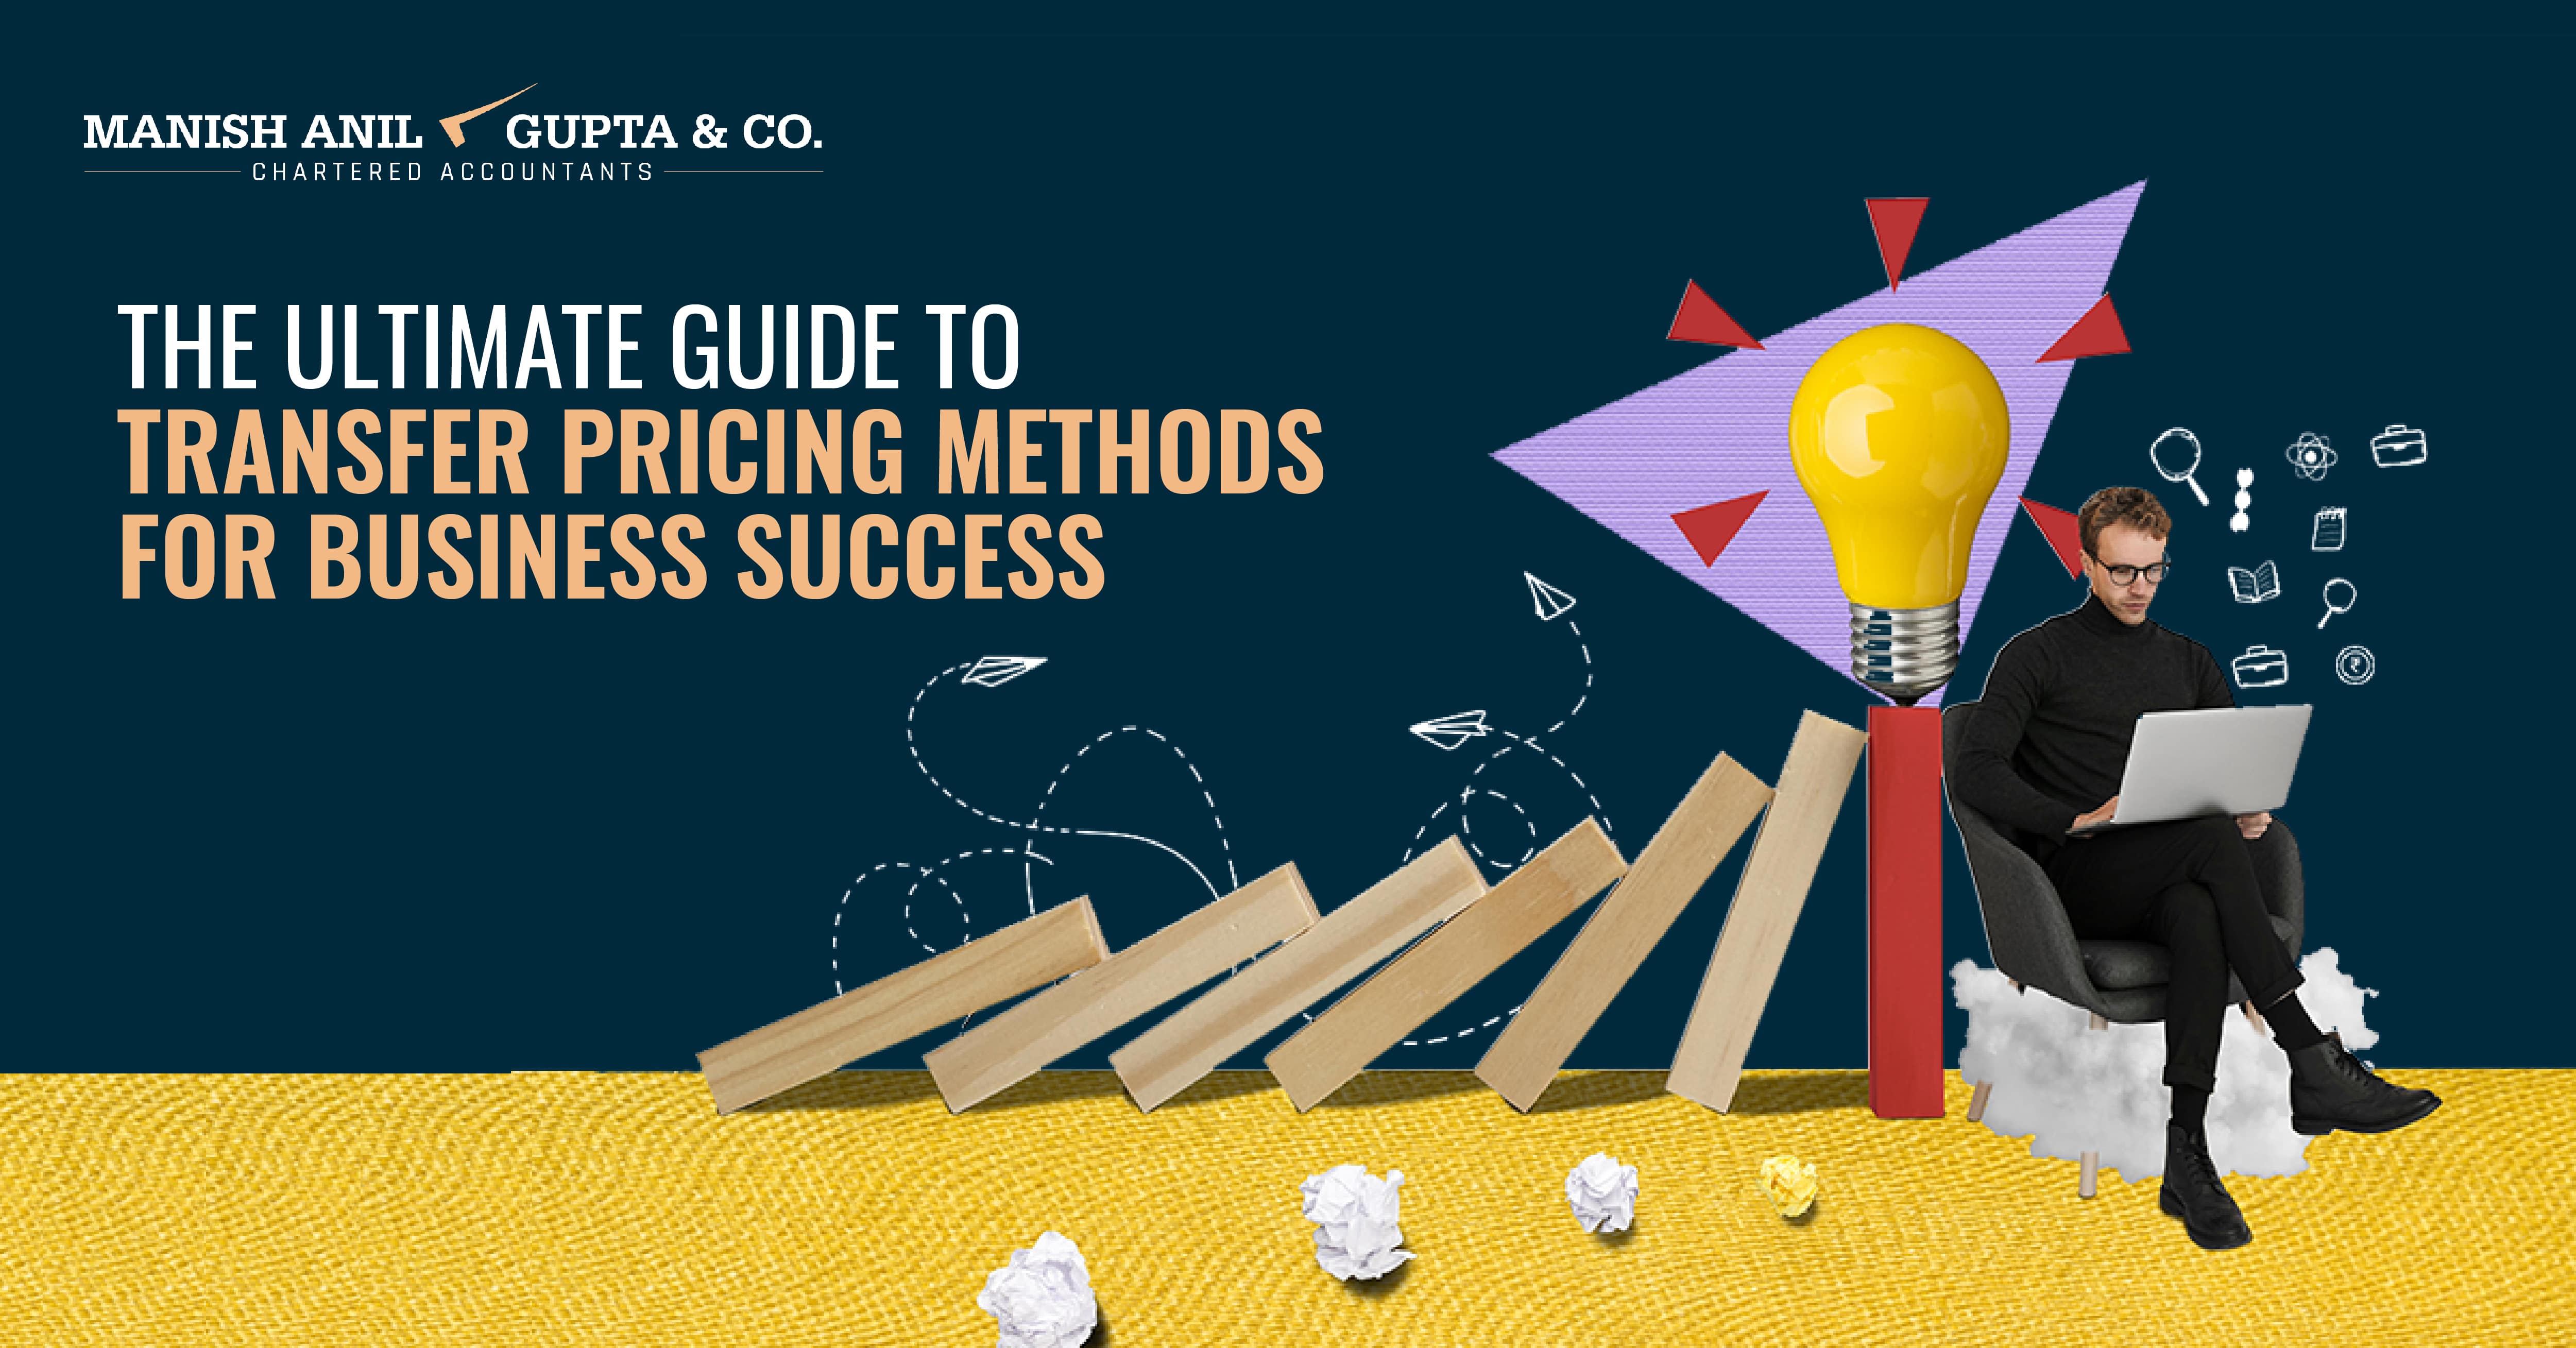 The Ultimate Guide to Transfer Pricing Methods for Business Success